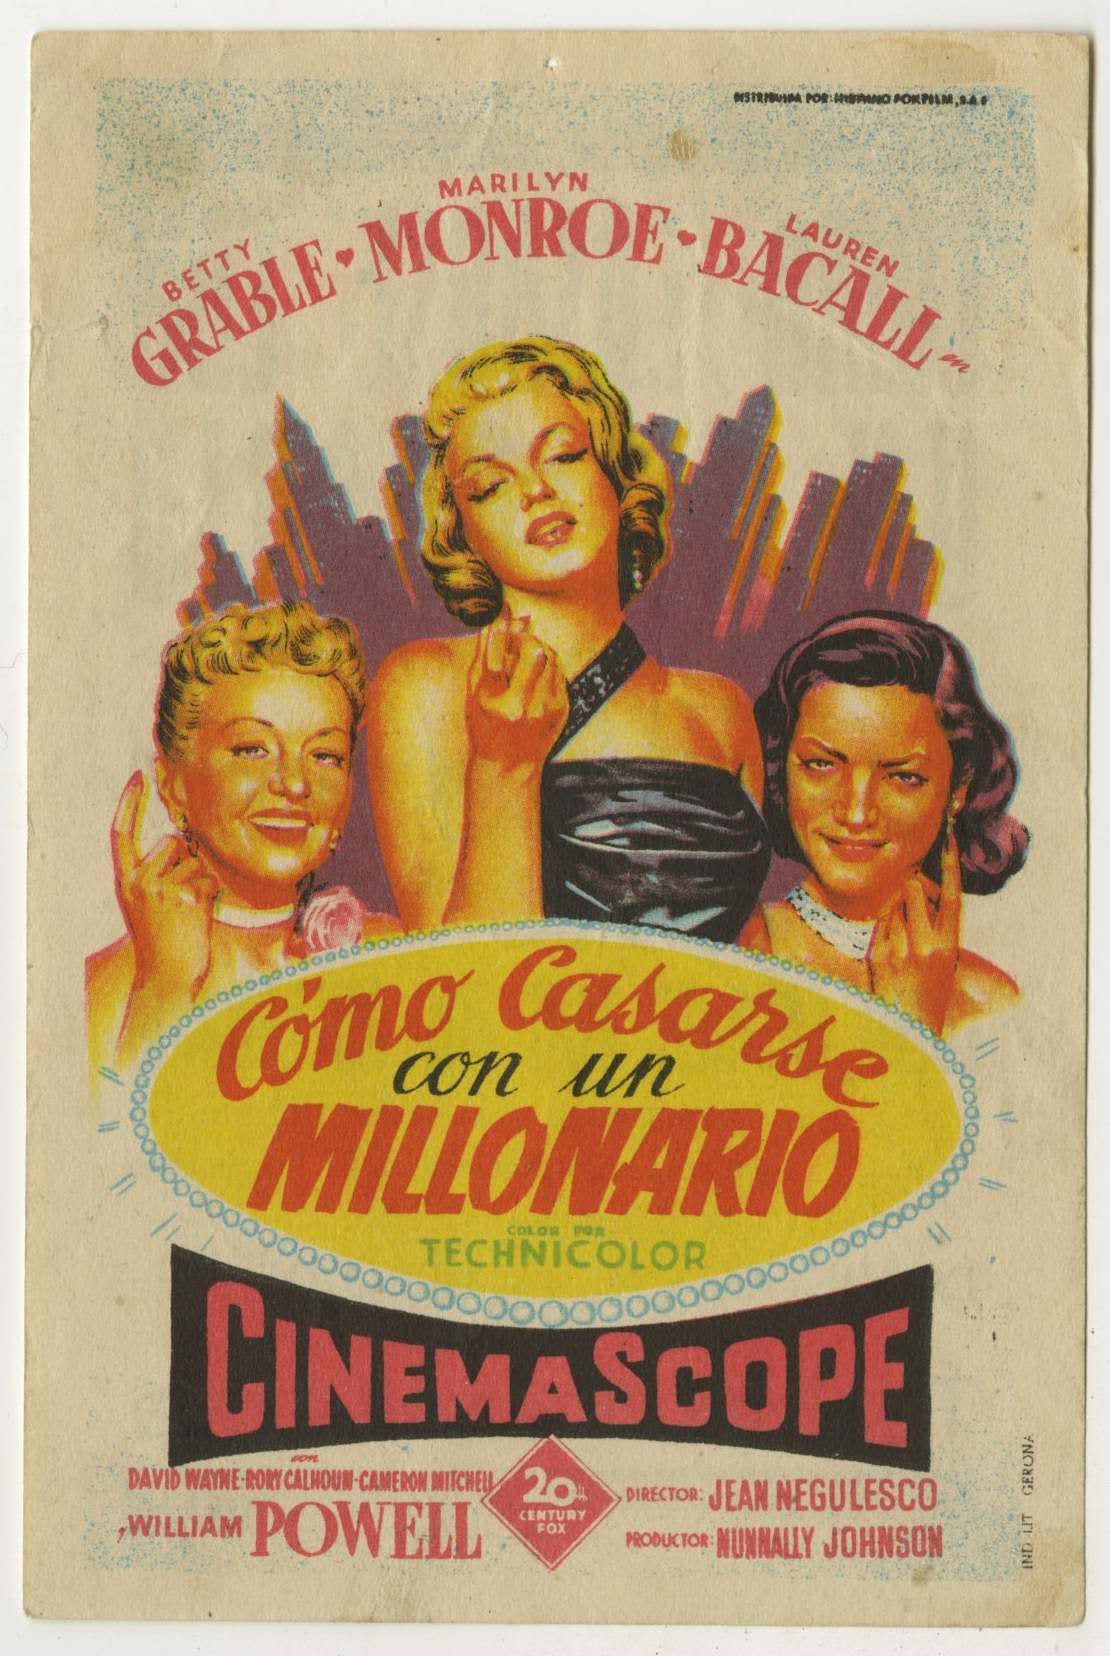 How To Marry A Millionaire Spanish Herald (R 1957) - posterpalace.com